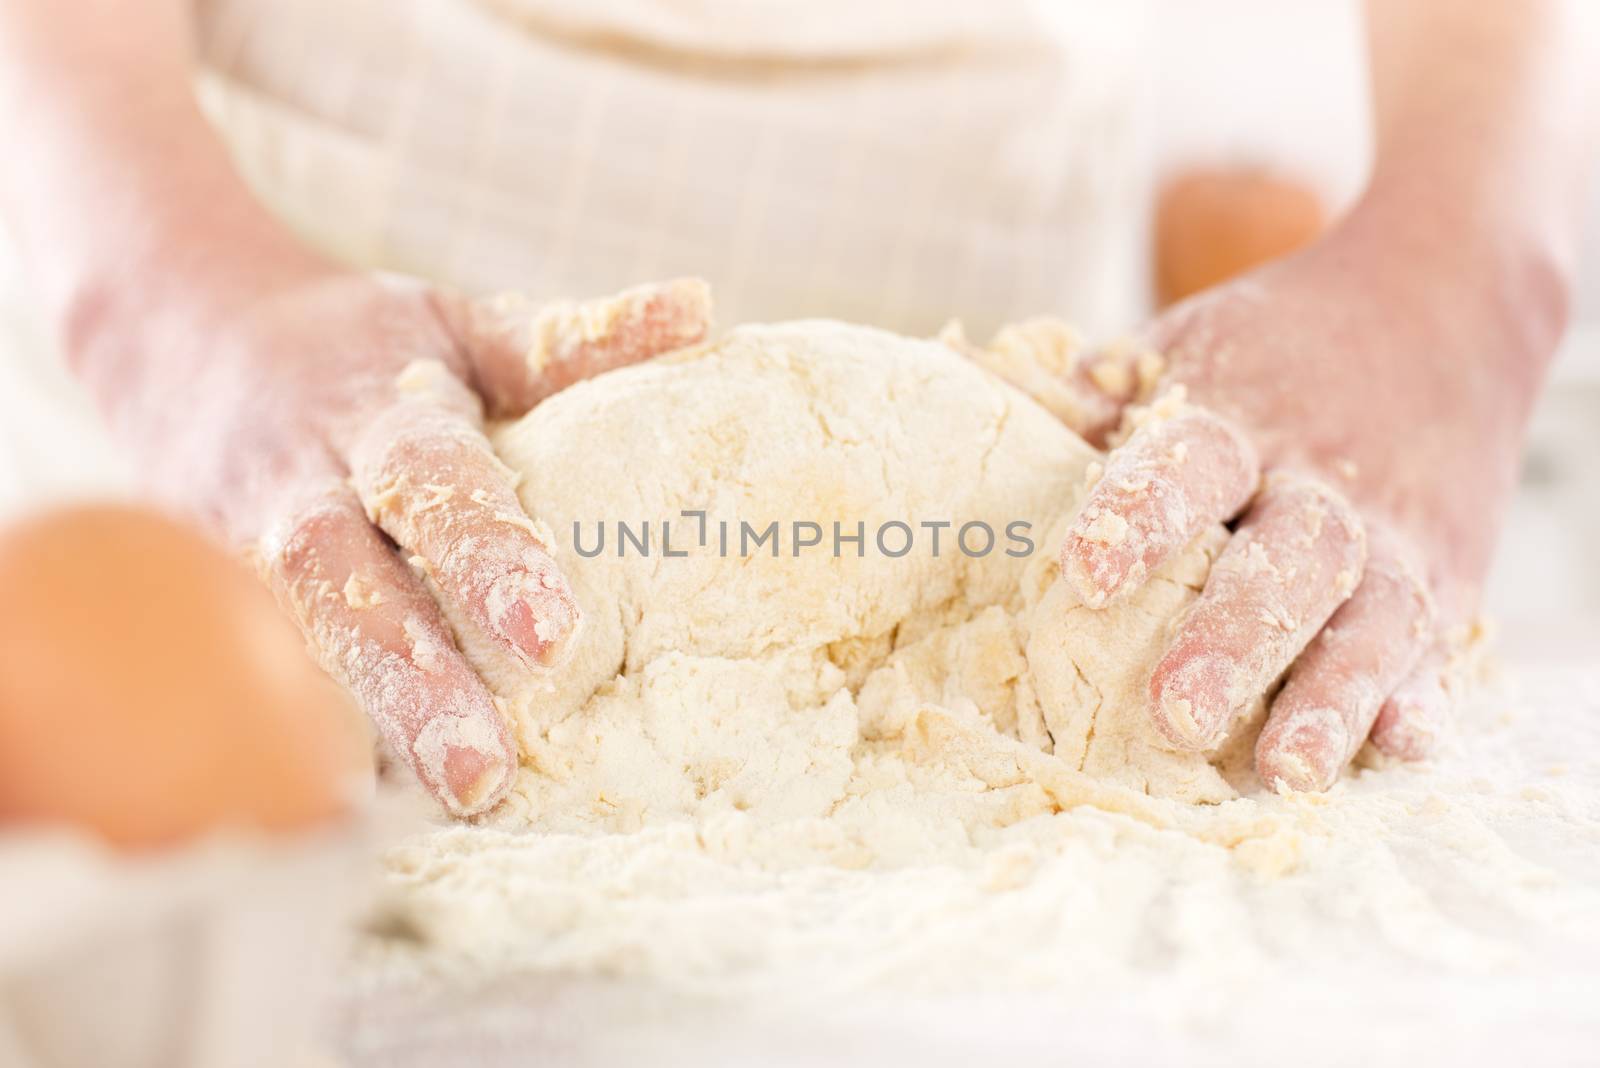 Pair of woman's hands kneading dough on table. Close-up